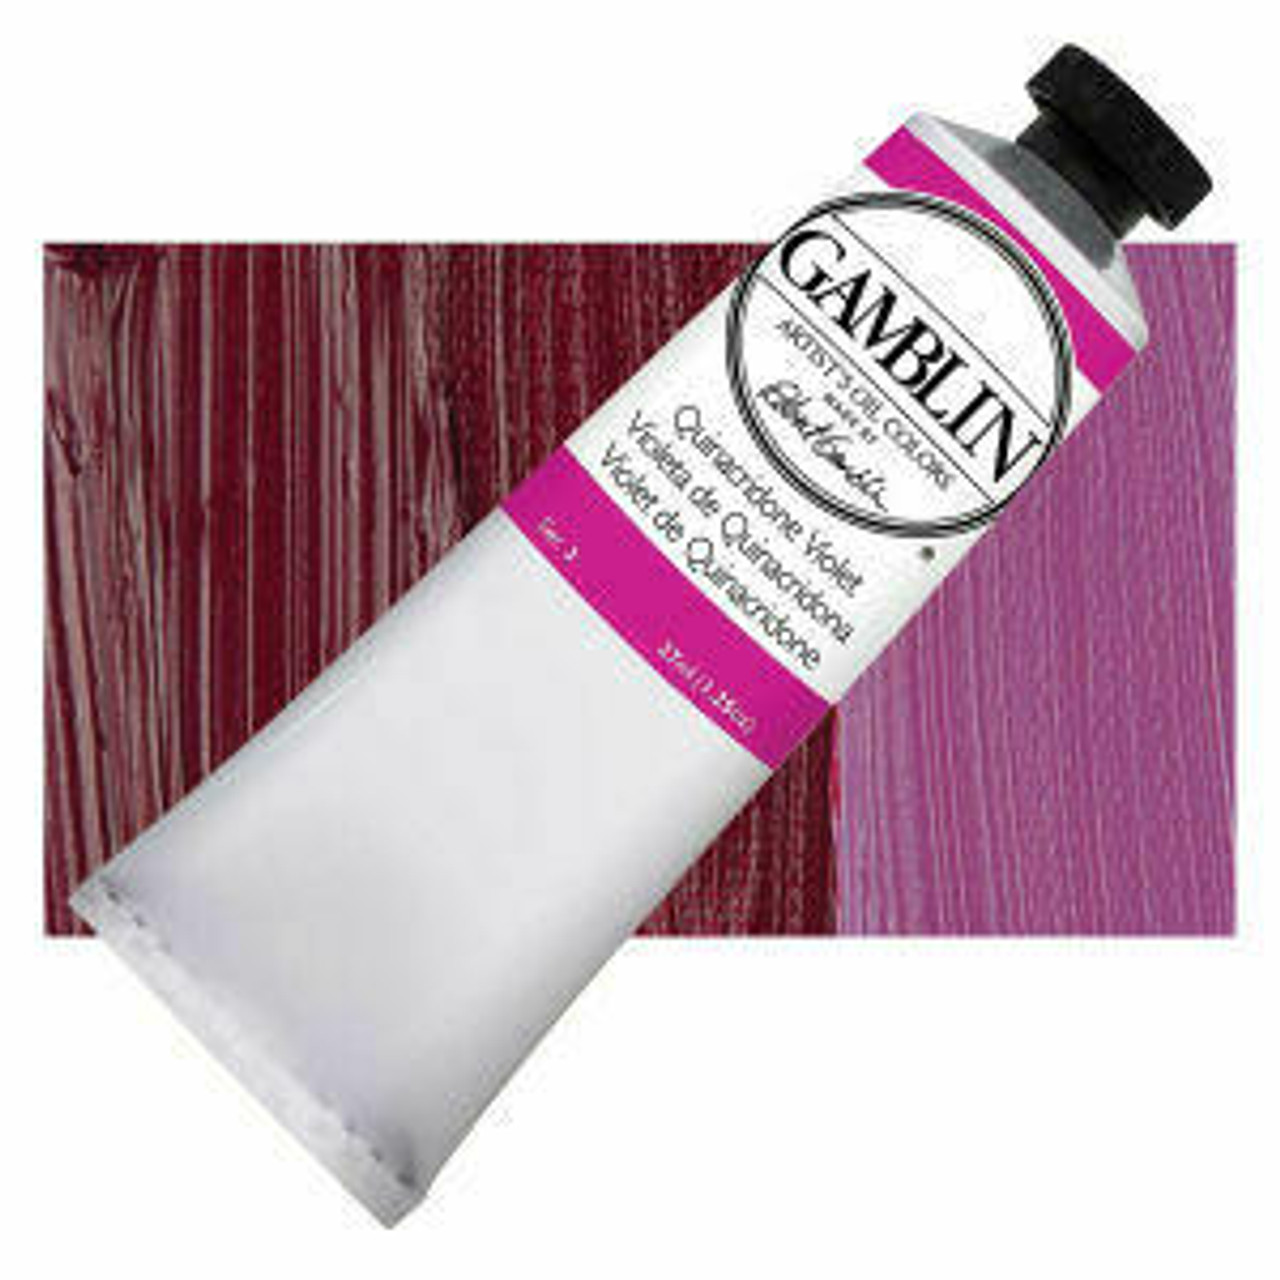 Oil Paints by Gamblin  Available Today in Doylestown, PA